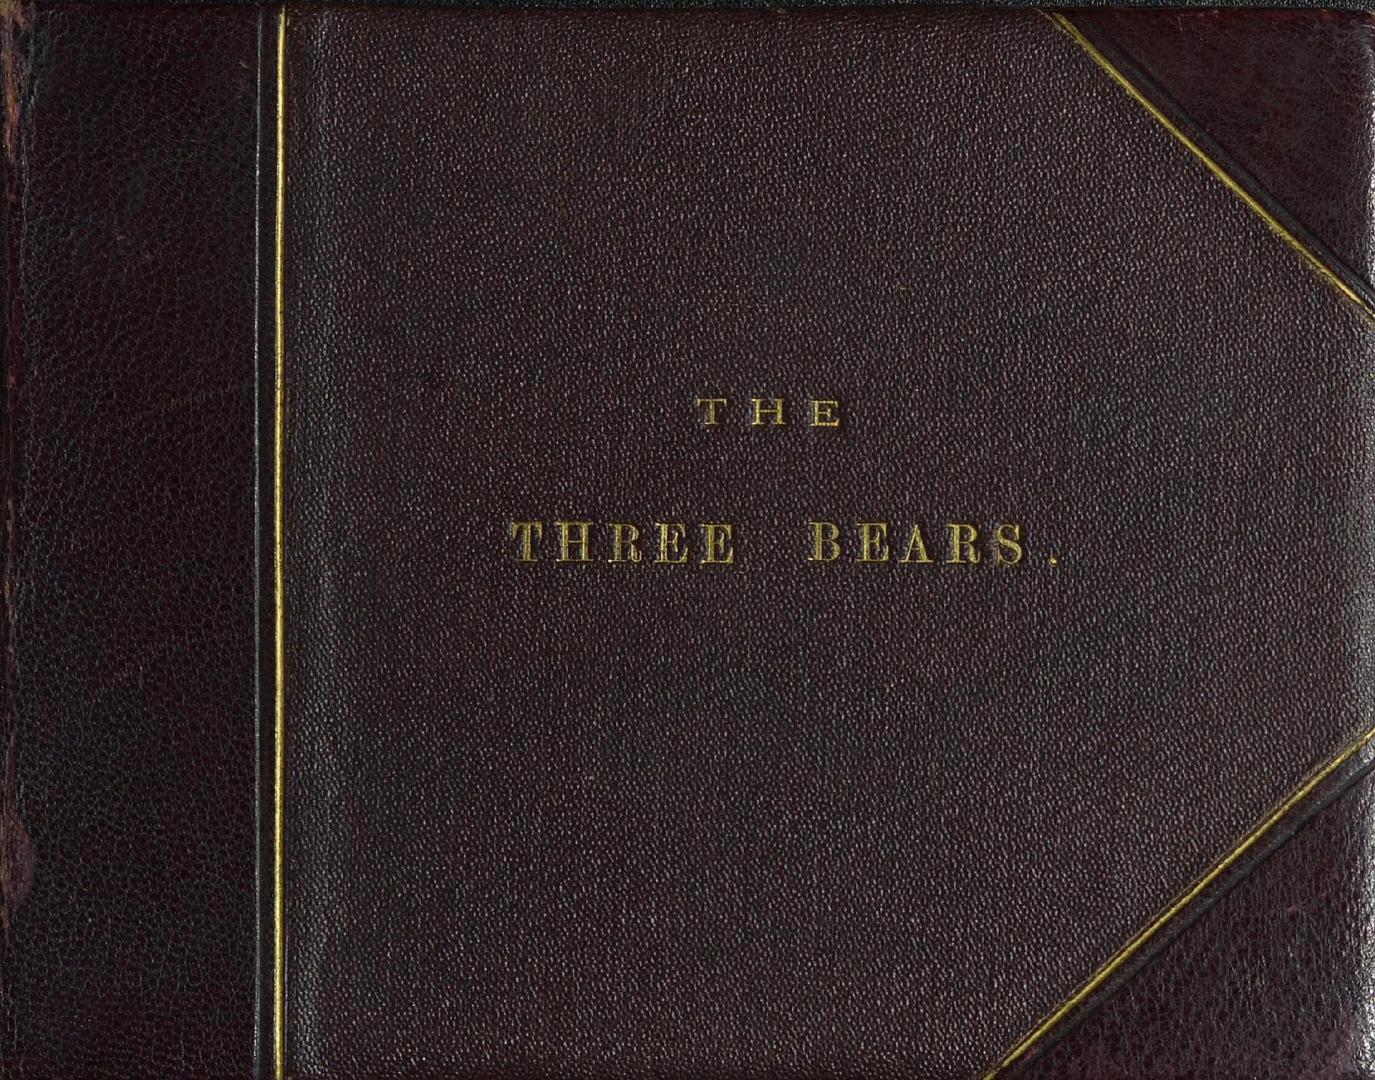 The story of the three bears